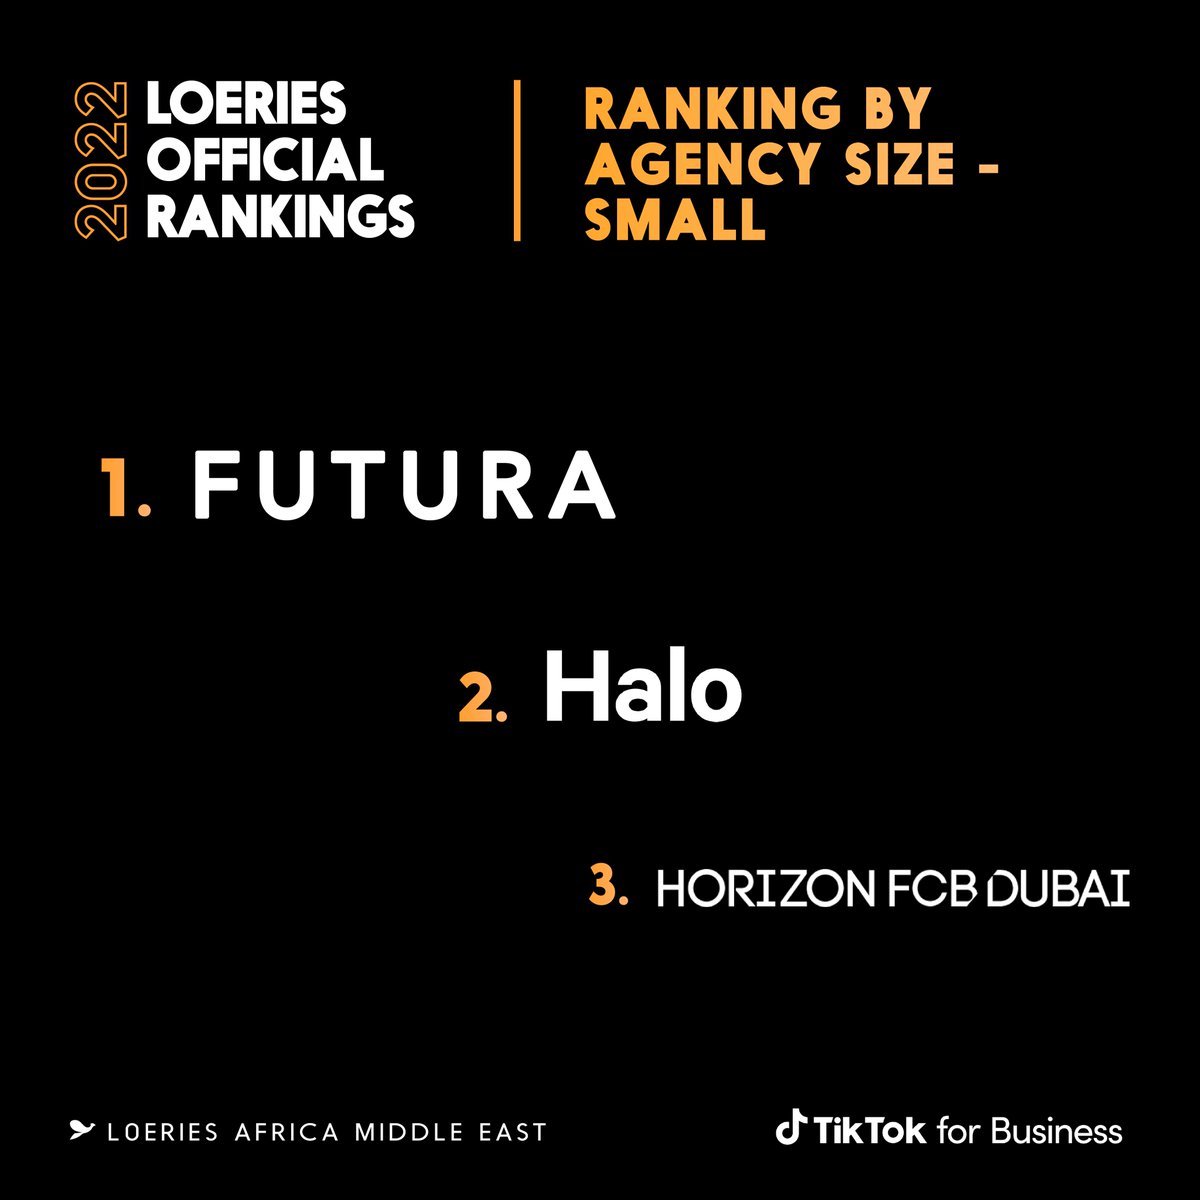 The Loerie Awards are delighted to congratulate the top-ranking small agencies in the region. #Loeries #LoeriesOfficialRankings2022 #Creativity